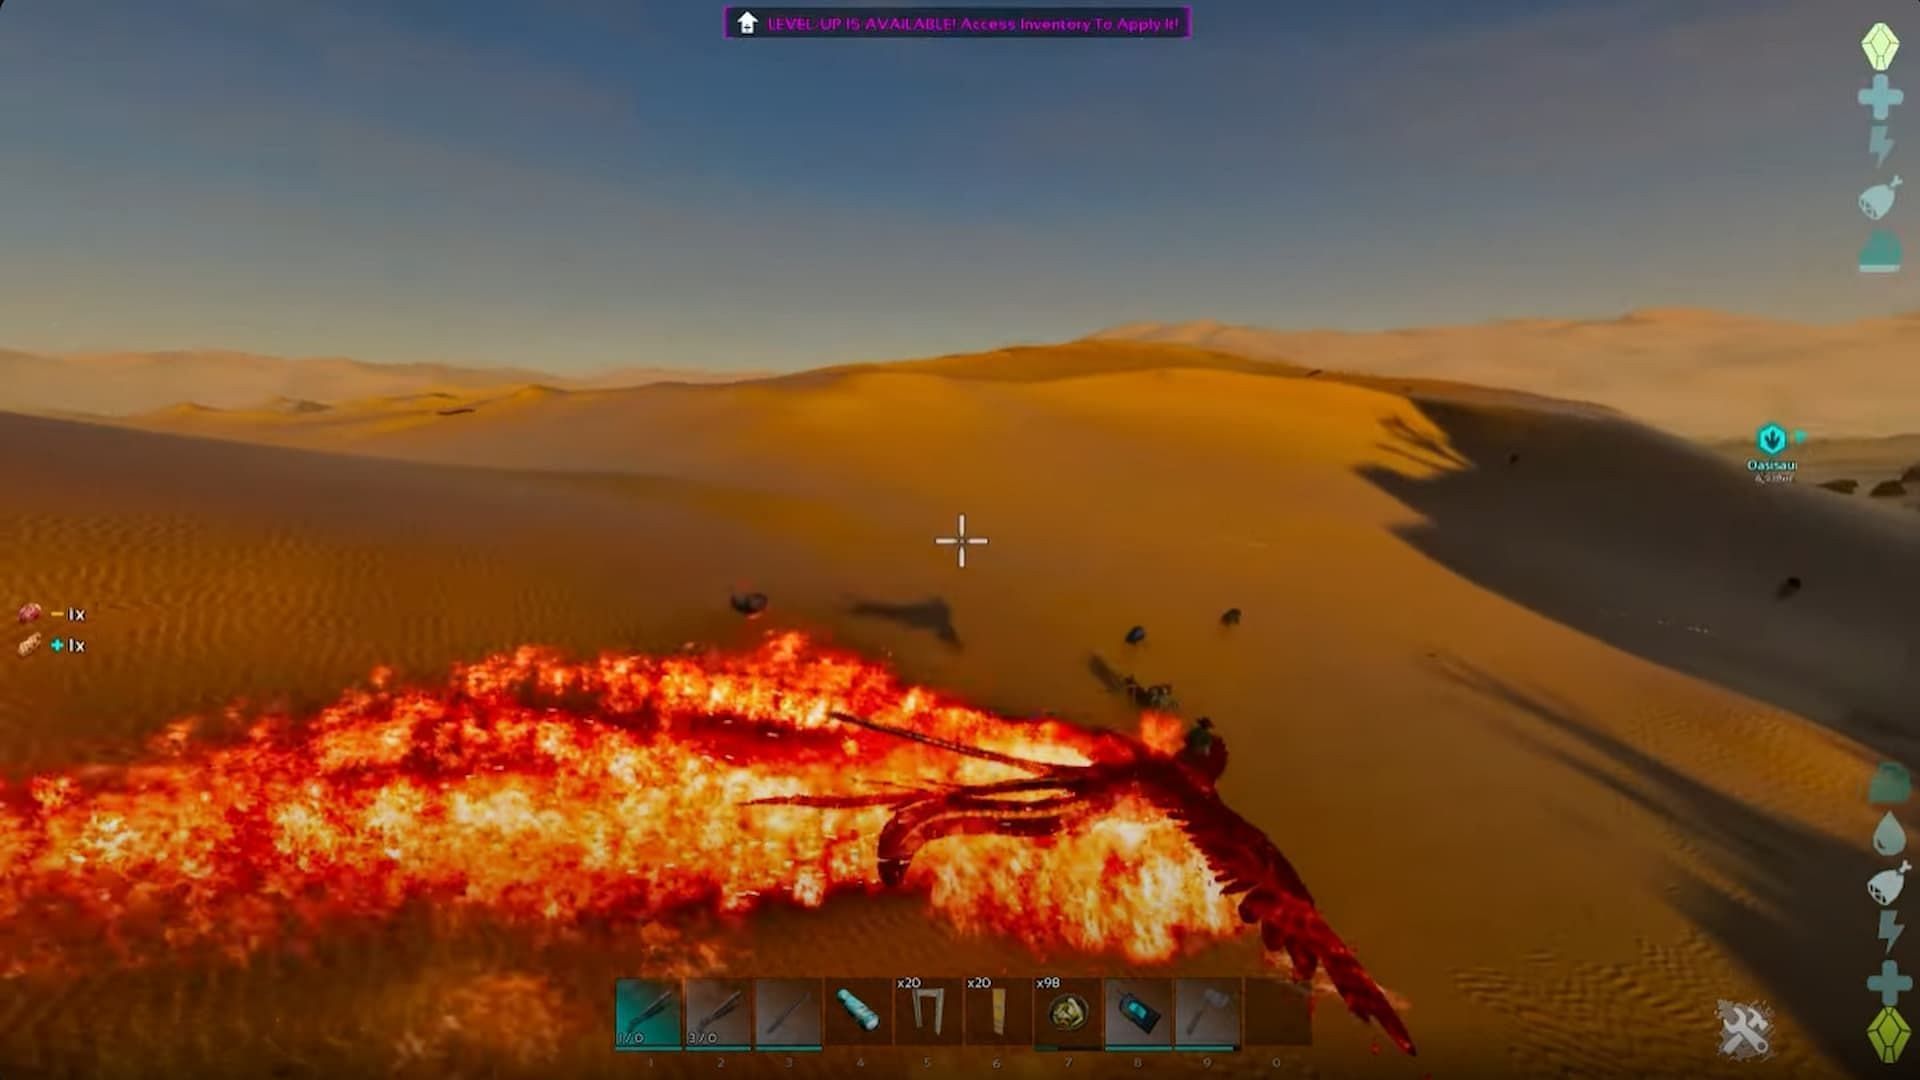 Phoenix can use many abilities in Ark Survival Ascended (Image via Studio Wildcard and Teachers Game Too/YouTube)